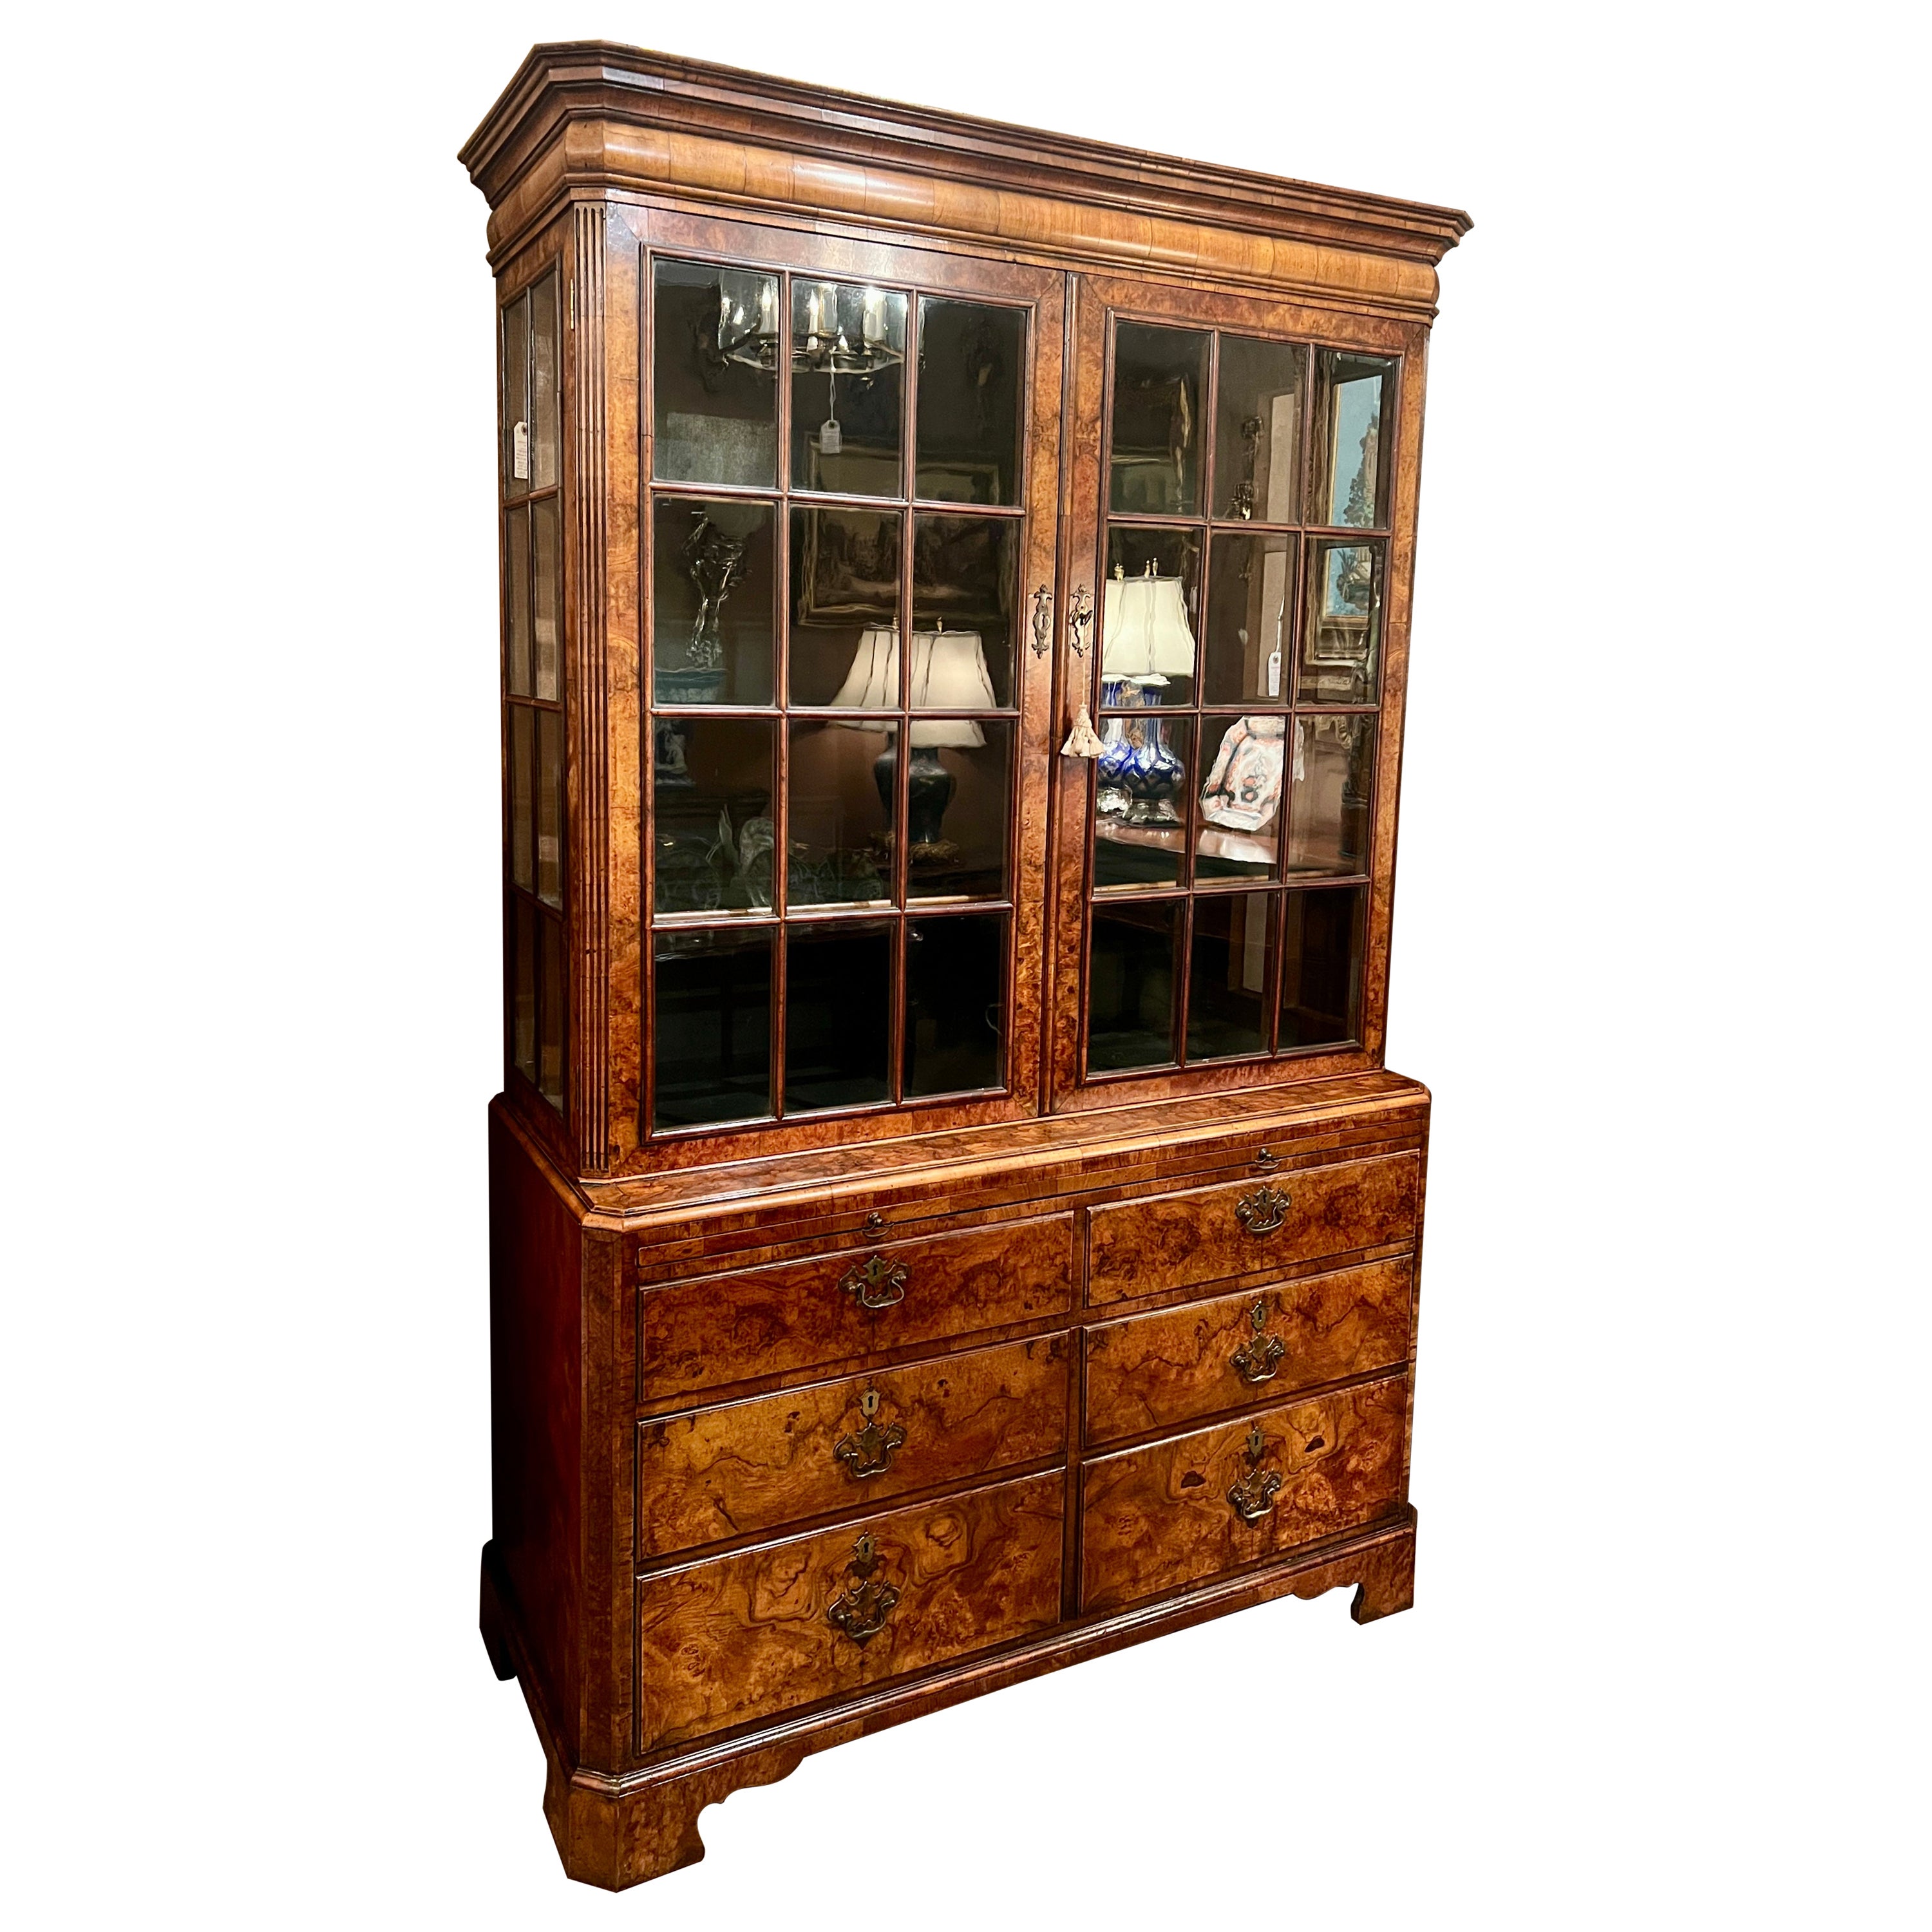 Antique English Burled Walnut Glass Front Cabinet with Writing Slide, Circa 1880 For Sale